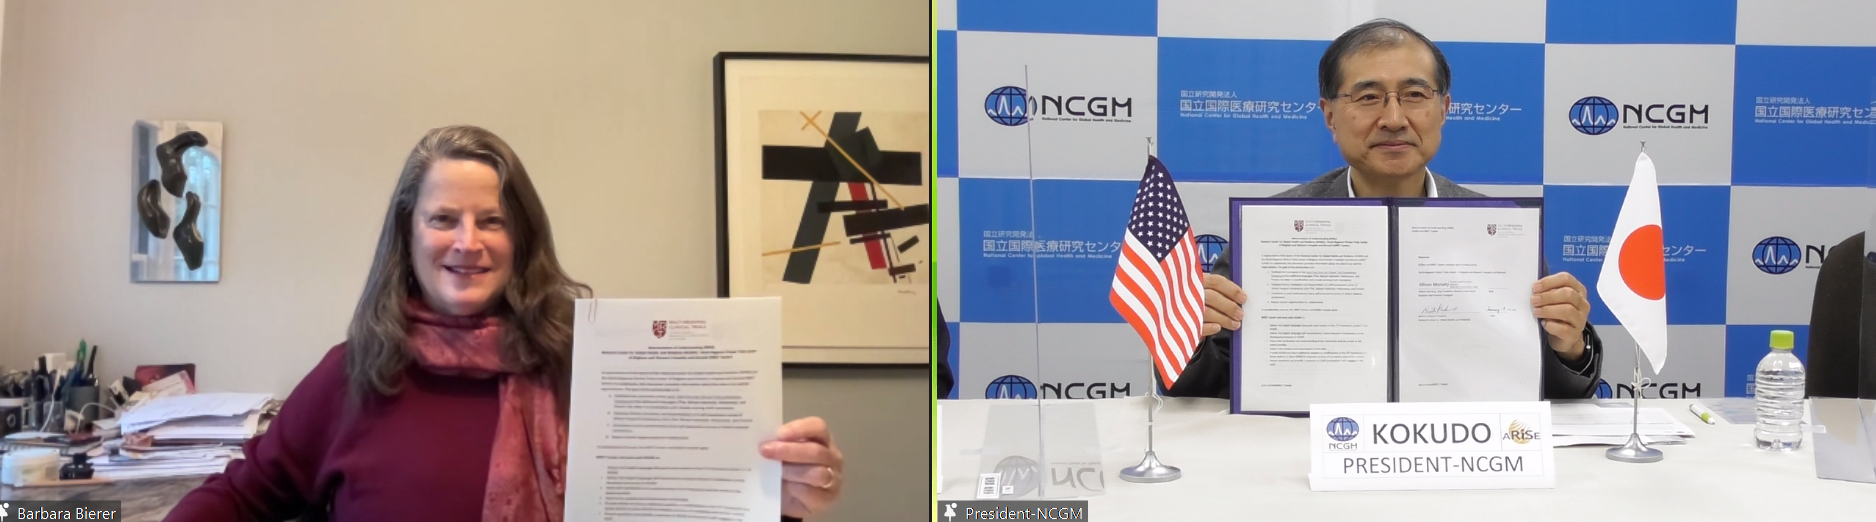 NCGMと米国The Multi-Regional Clinical Trials Center of Brigham and Women's Hospital and Harvardが協力に関する覚書（MoU）を締結